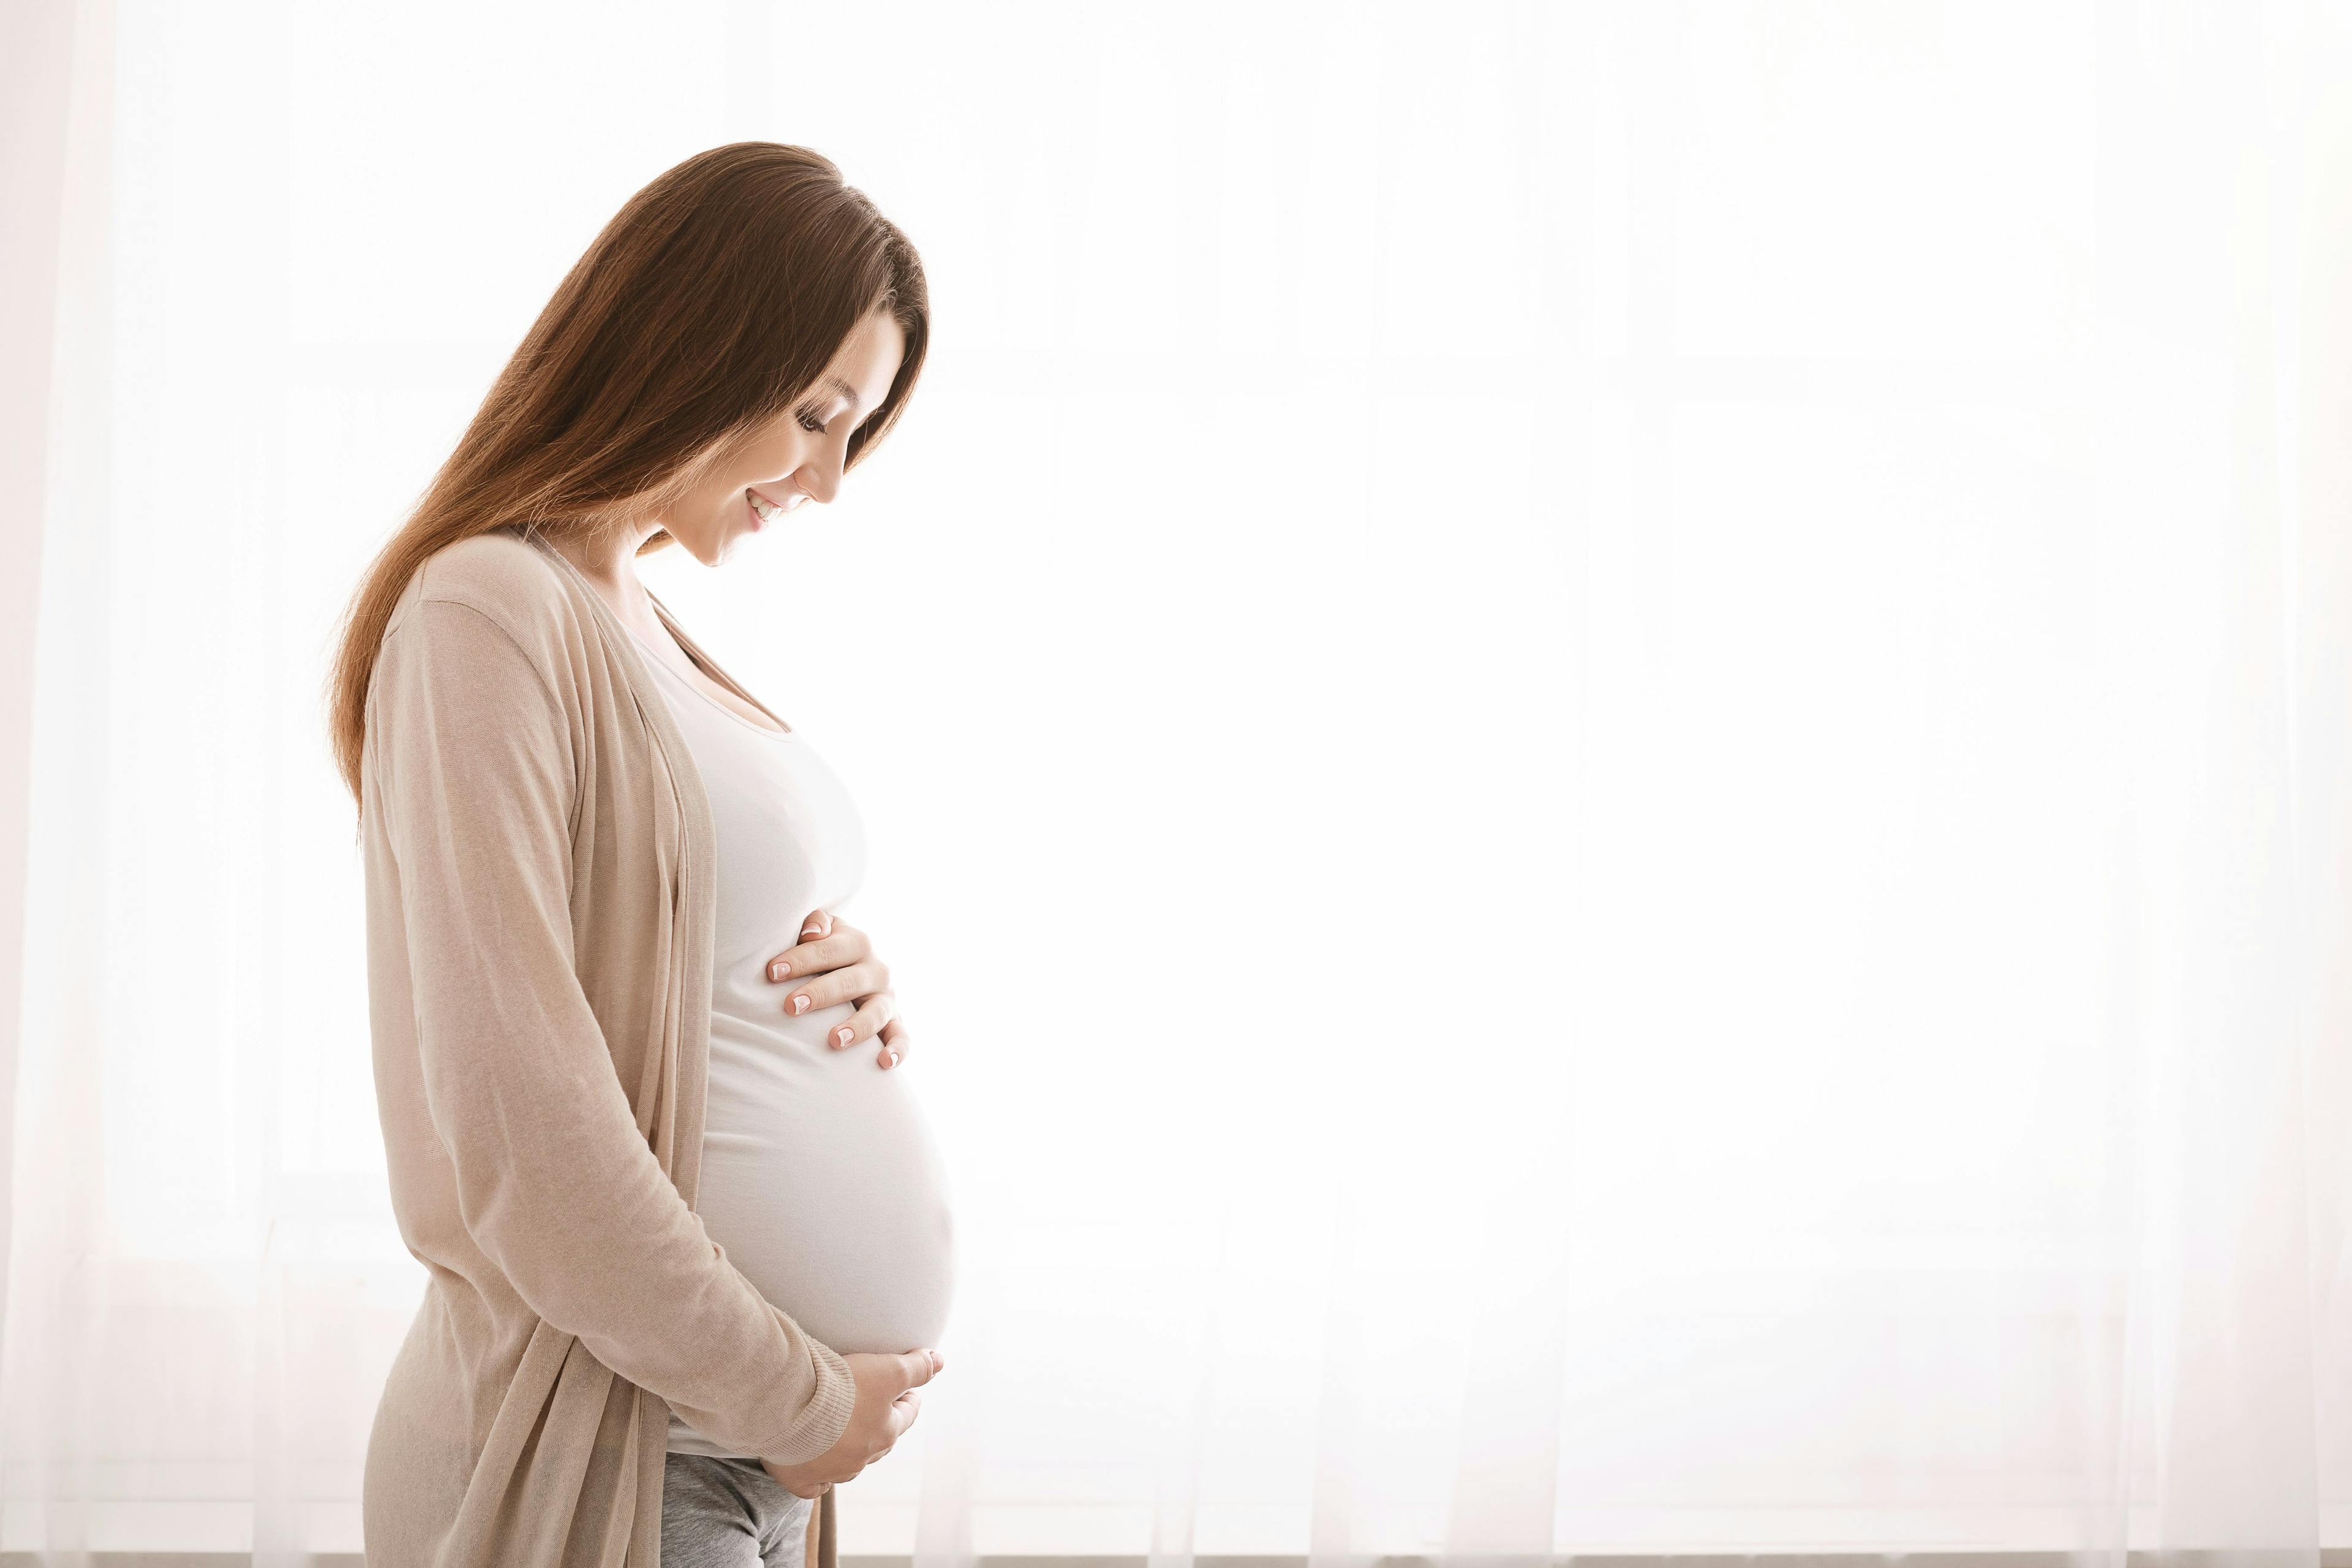 Did domestic violence and unstable living conditions increase among pregnant women during the early days of the COVID-19 pandemic?